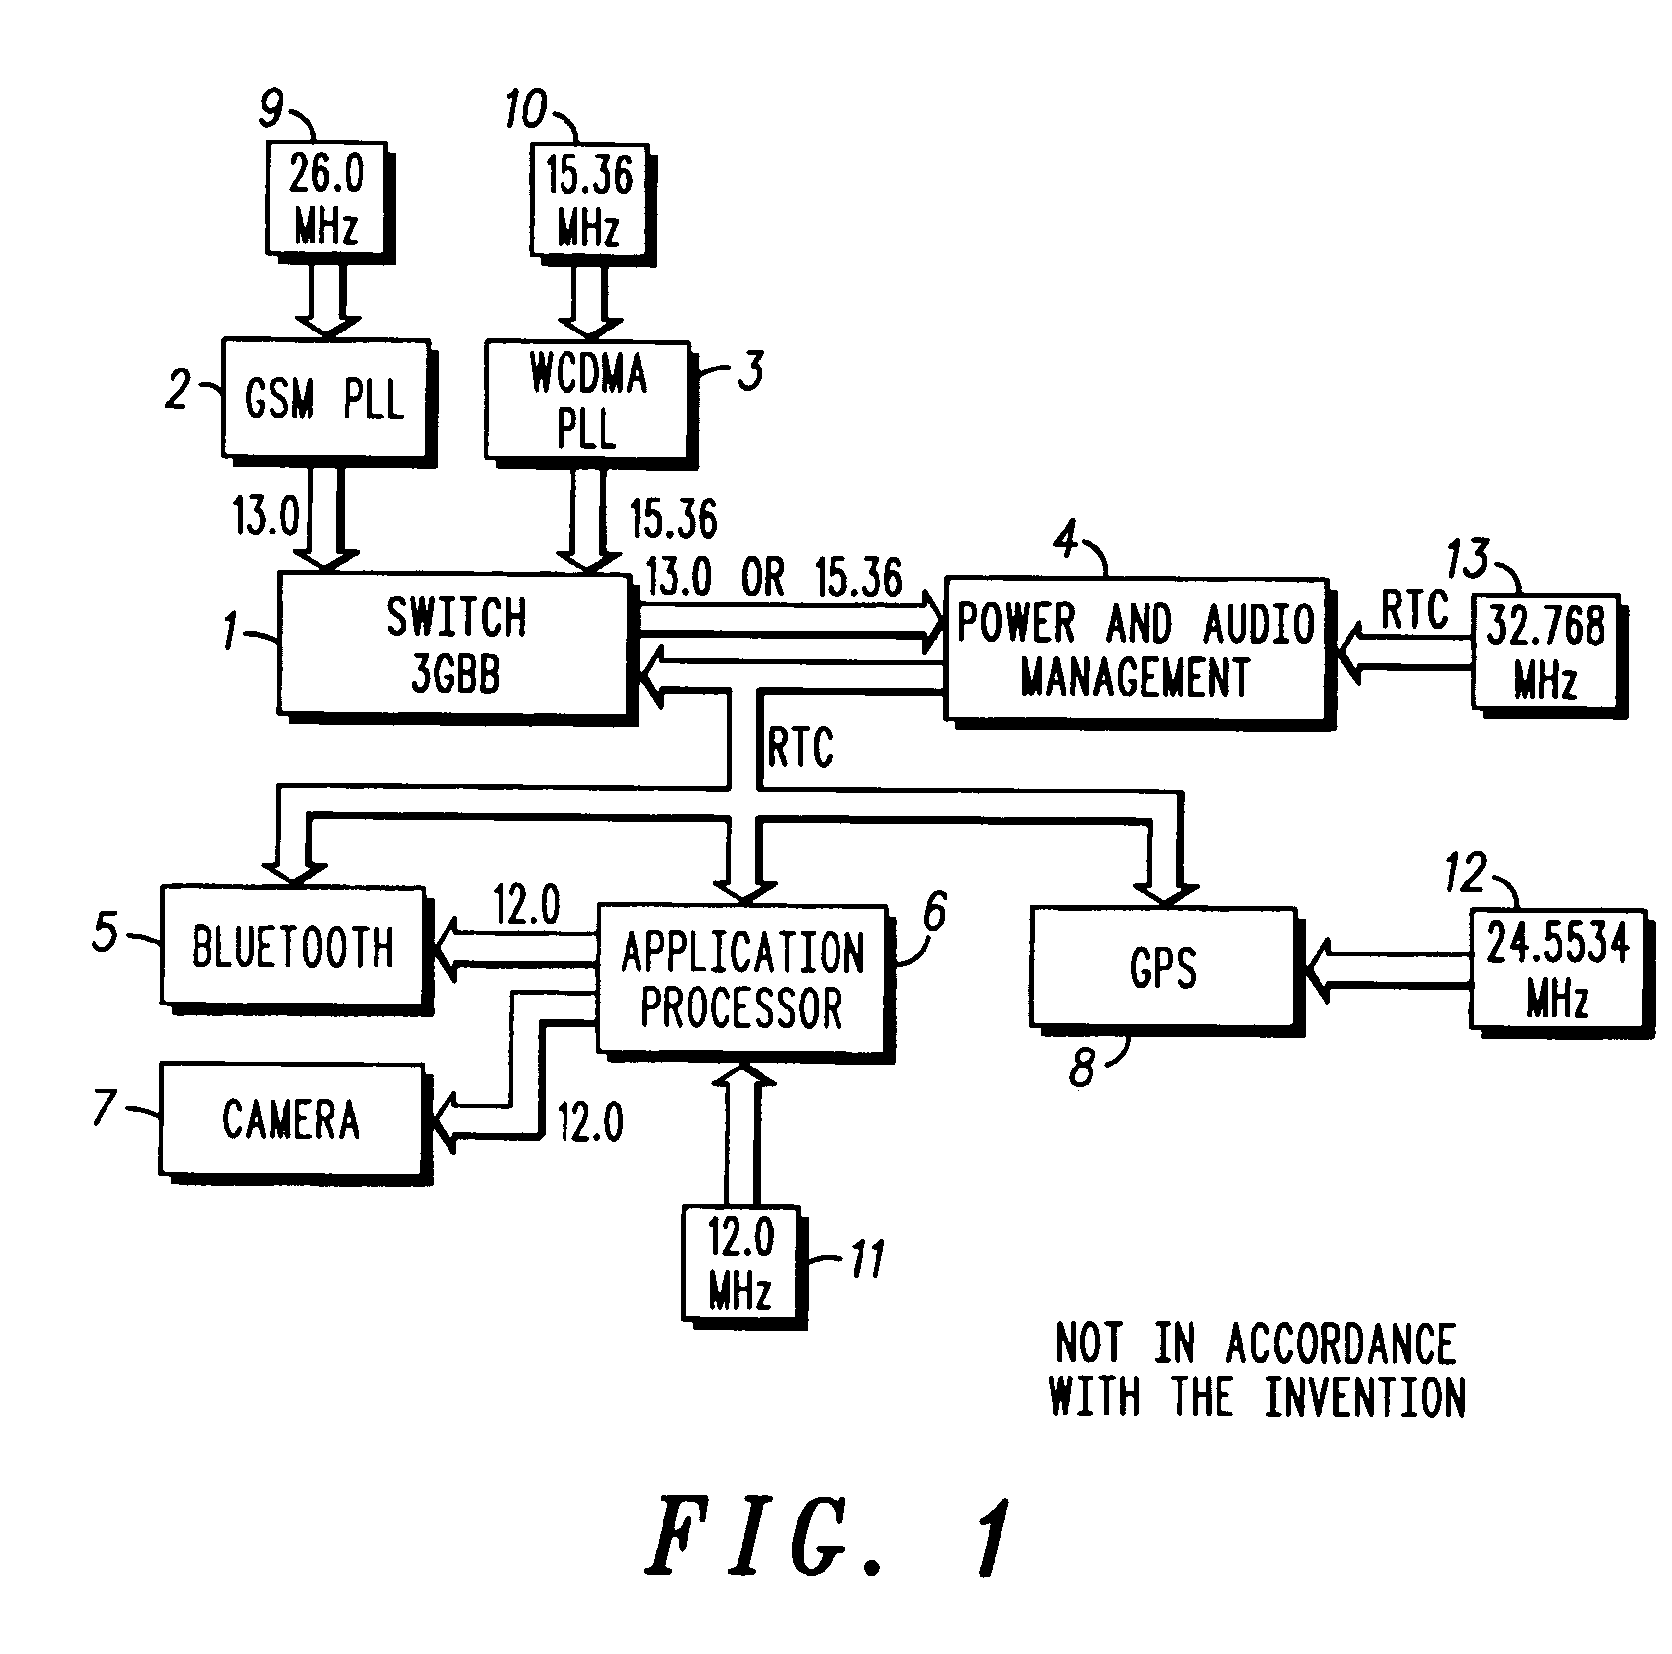 Apparatus for generating multiple clock signals of different frequency characteristics